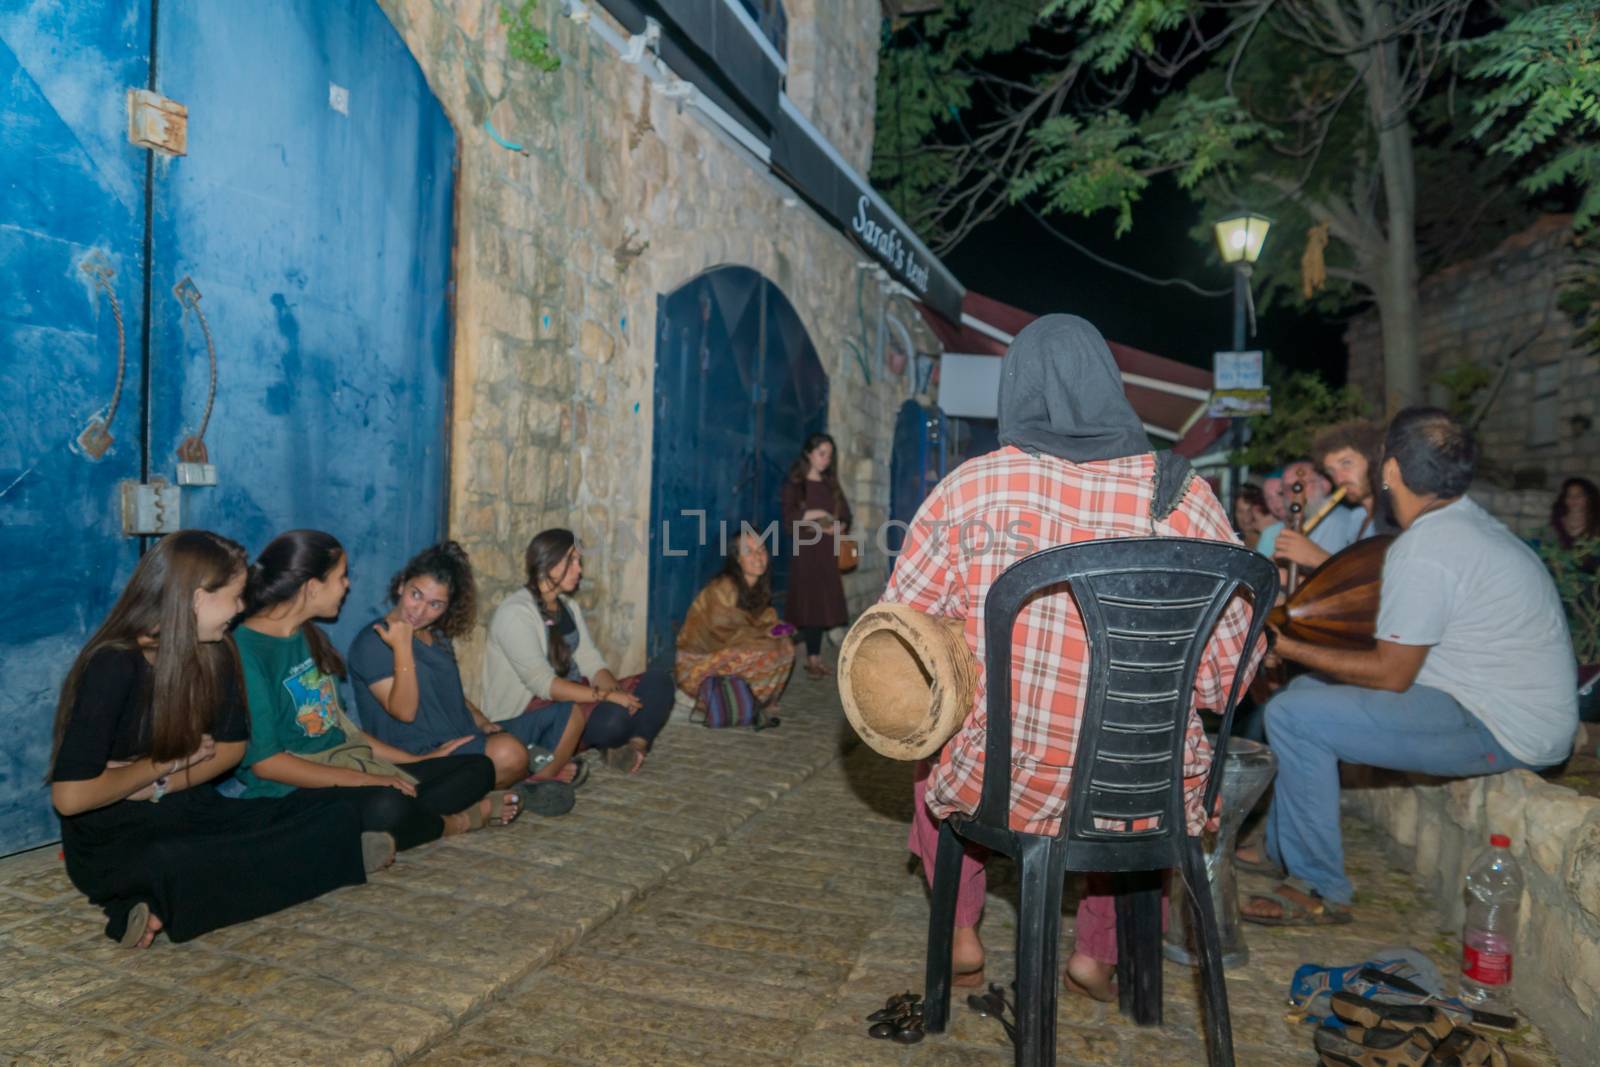 Safed, Israel - August 14, 2018: The Klezmer Festival, with people listen to street musicians, in Safed (Tzfat), Israel. Its the 31st annual traditional Jewish festival in the public streets of Safed